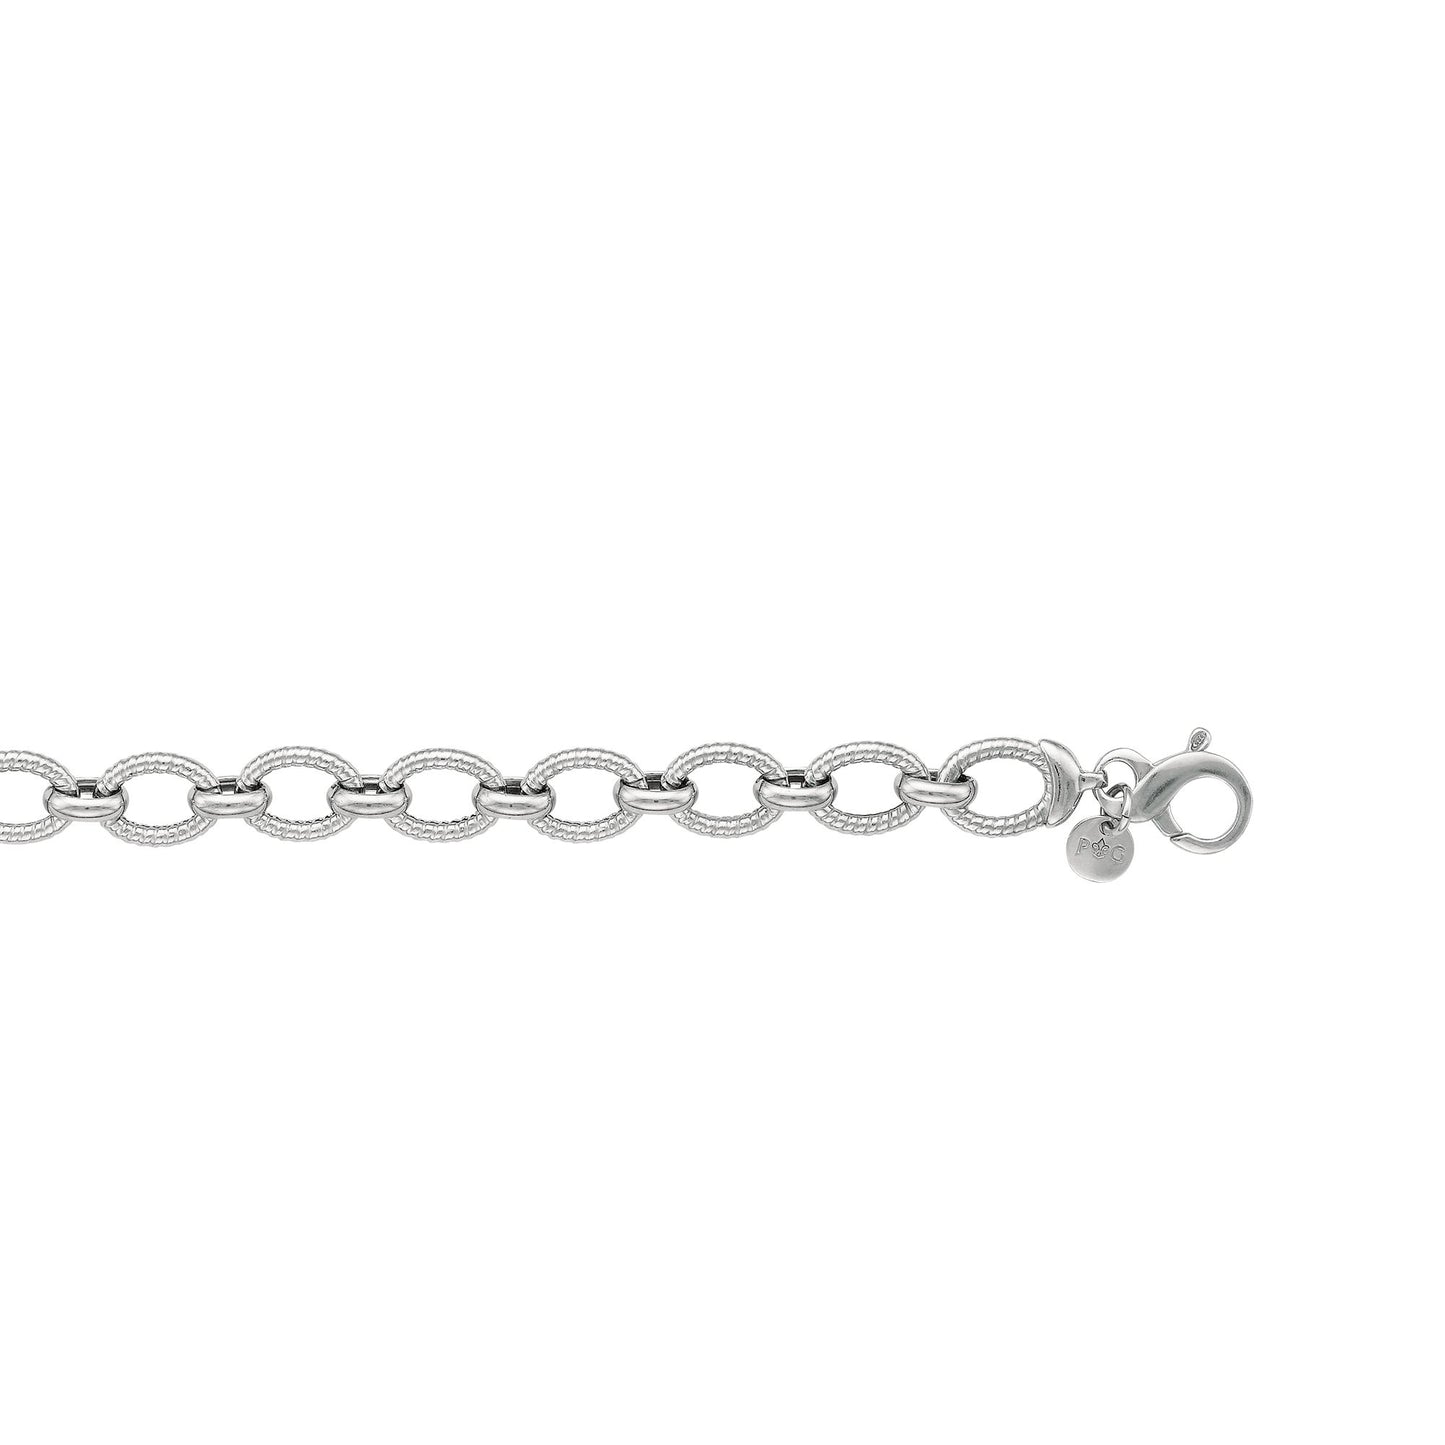 Sterling Silver Italian Cable Link Bracelet with Alternating Small Oval Links and Large Tight Twisted Texture Oval Link